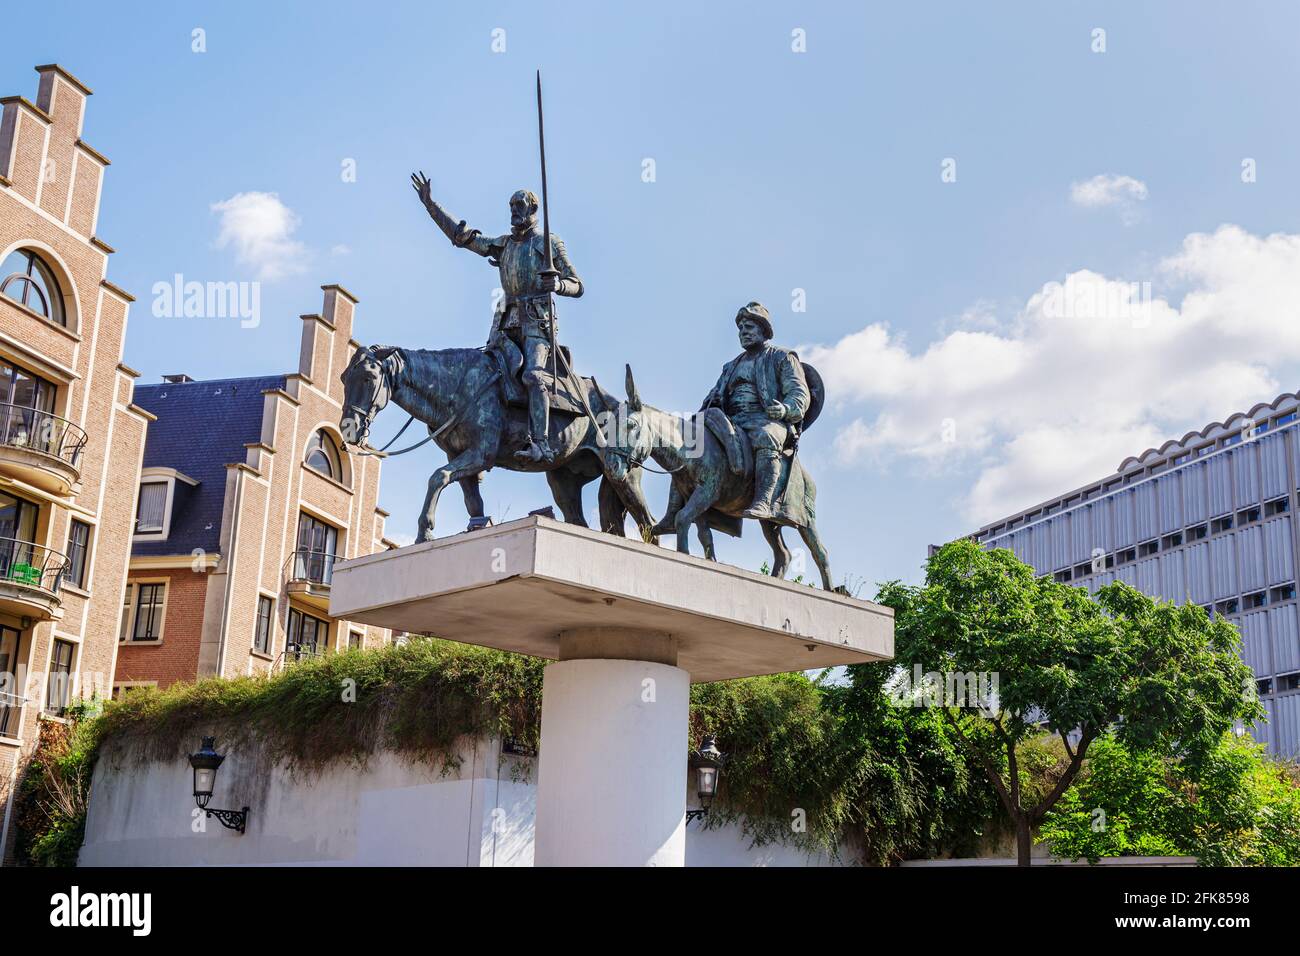 BRUSSELS, BELGIUM - Jun 04, 2017: Monument to Don Quixote and Sancha Panza at Spanish Place Square in Brussels Stock Photo